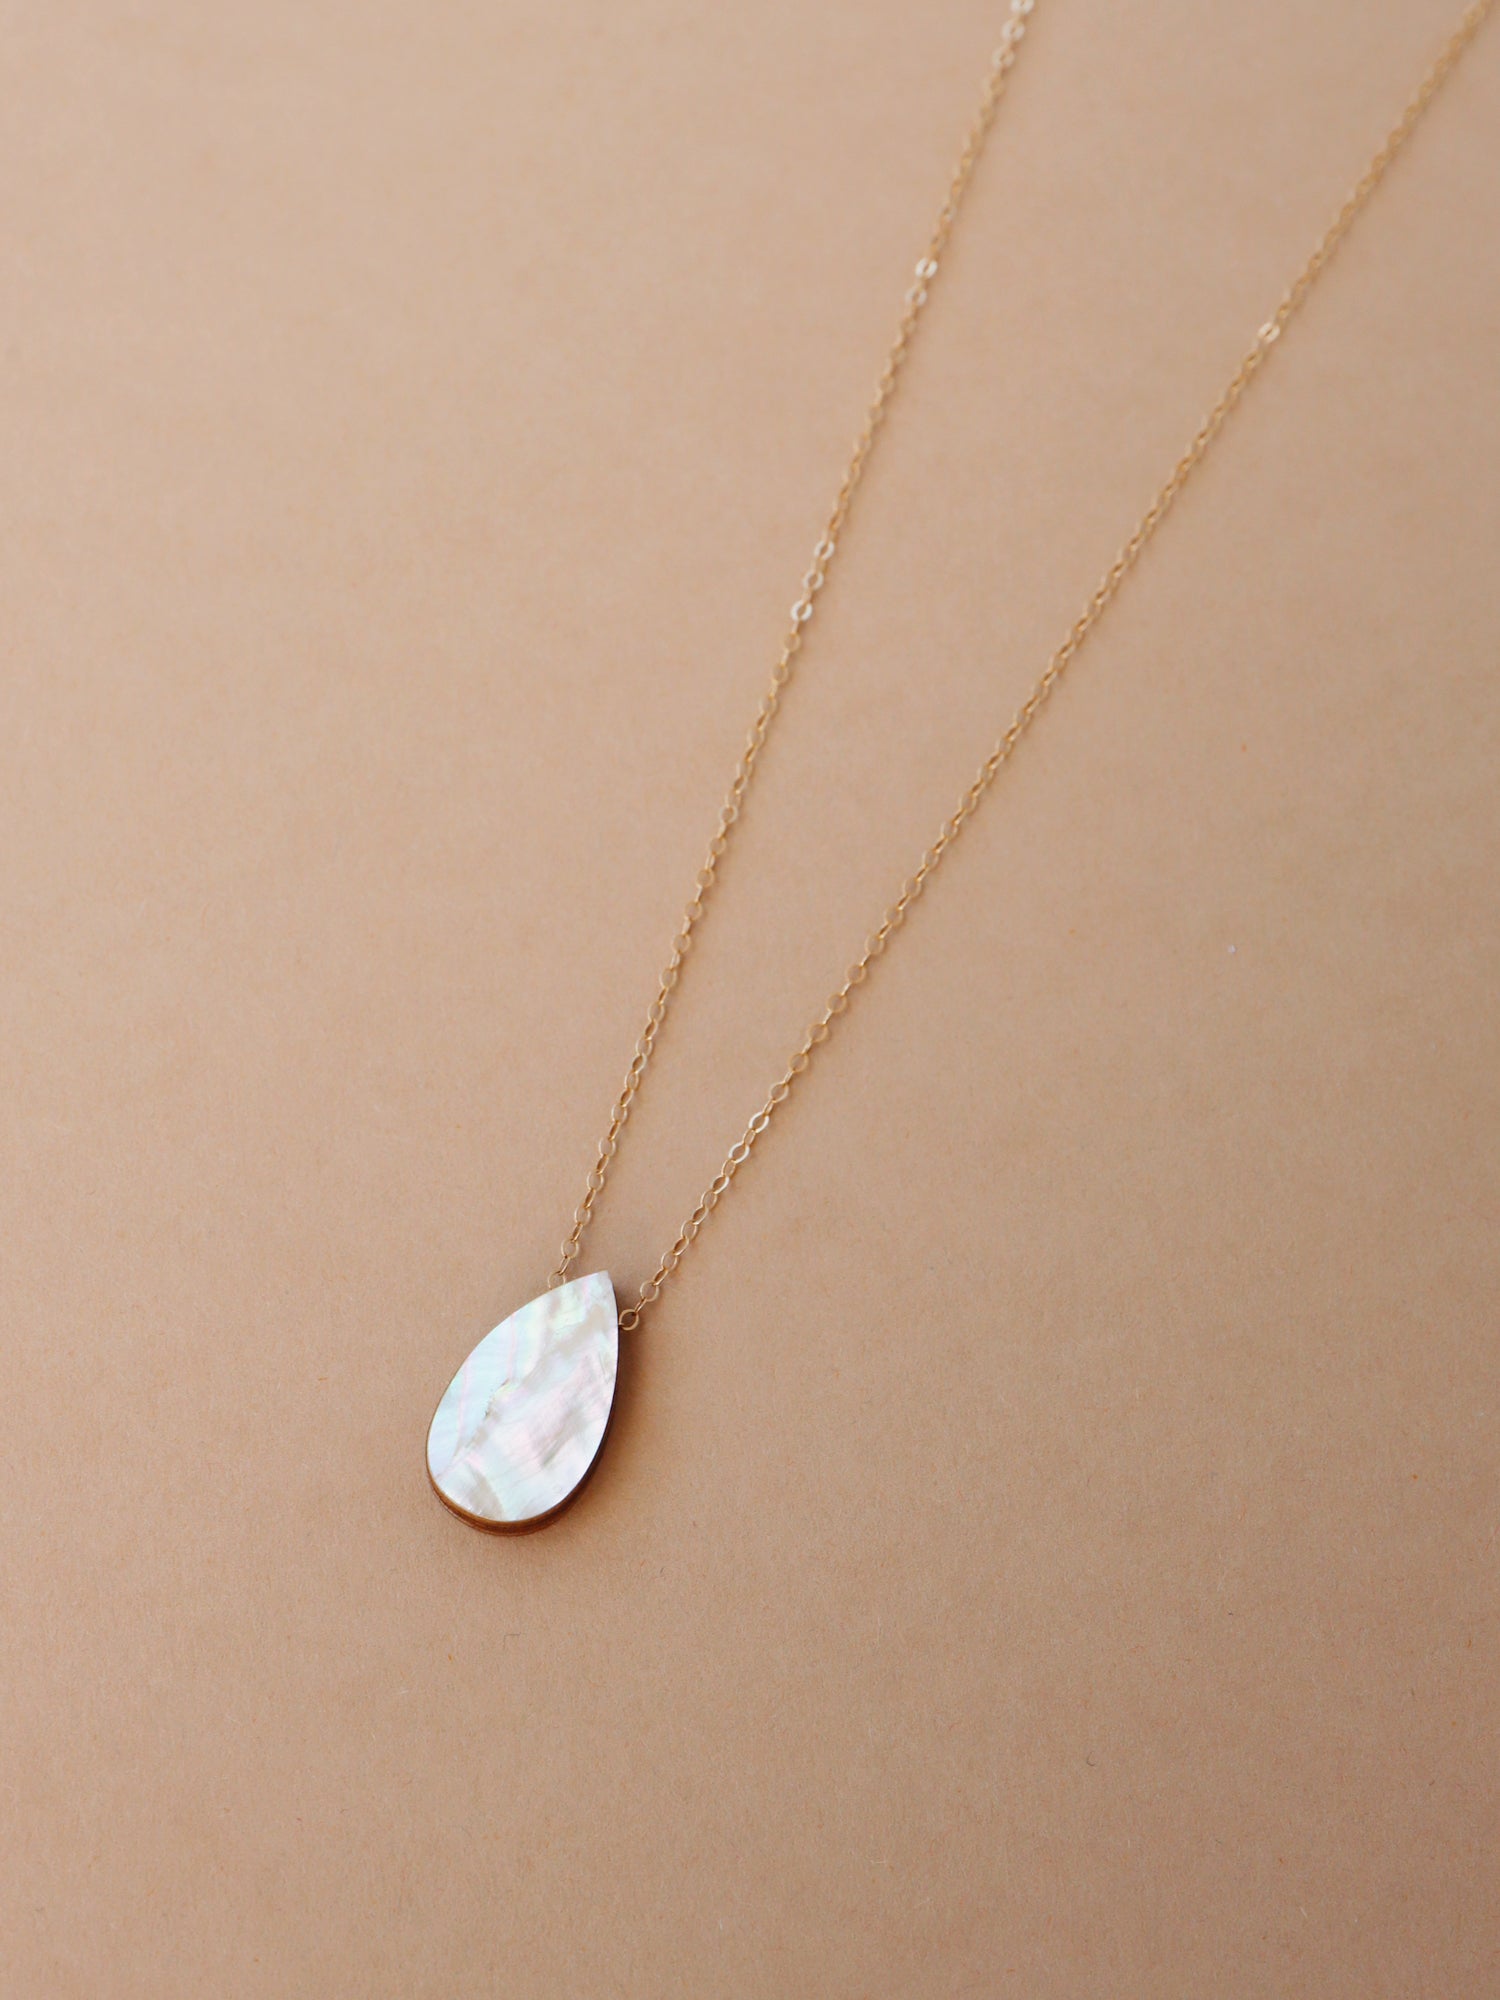 20. Raindrop Necklace in Cream - No Chain/Pendant Only - Discontinued